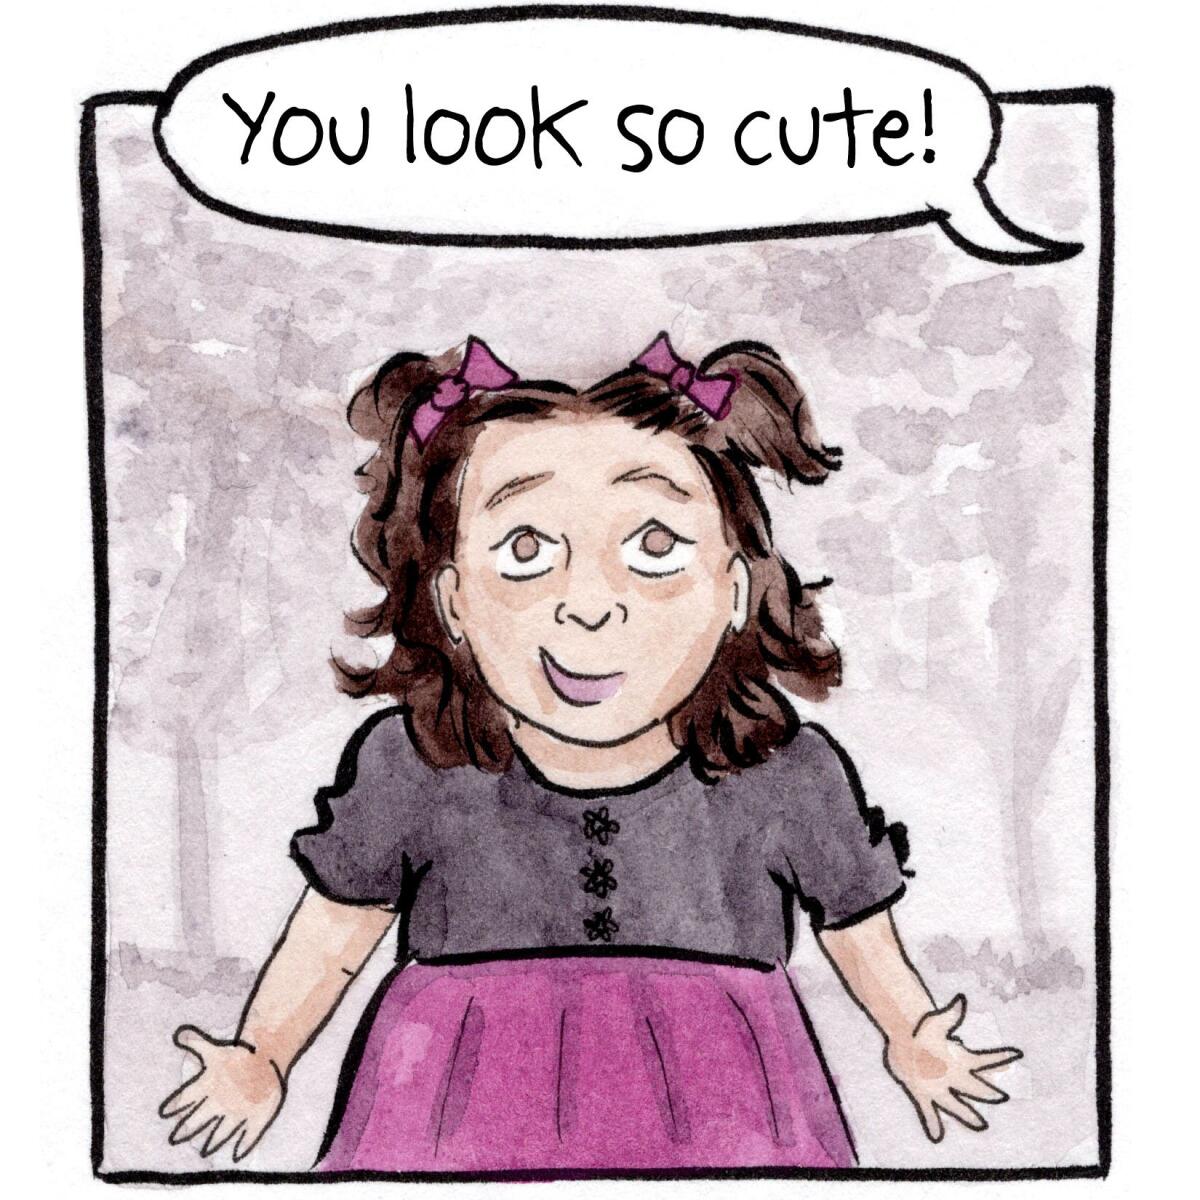 Someone says, "You look nice!" to a little girl wearing a dress and ribbons in her hair.